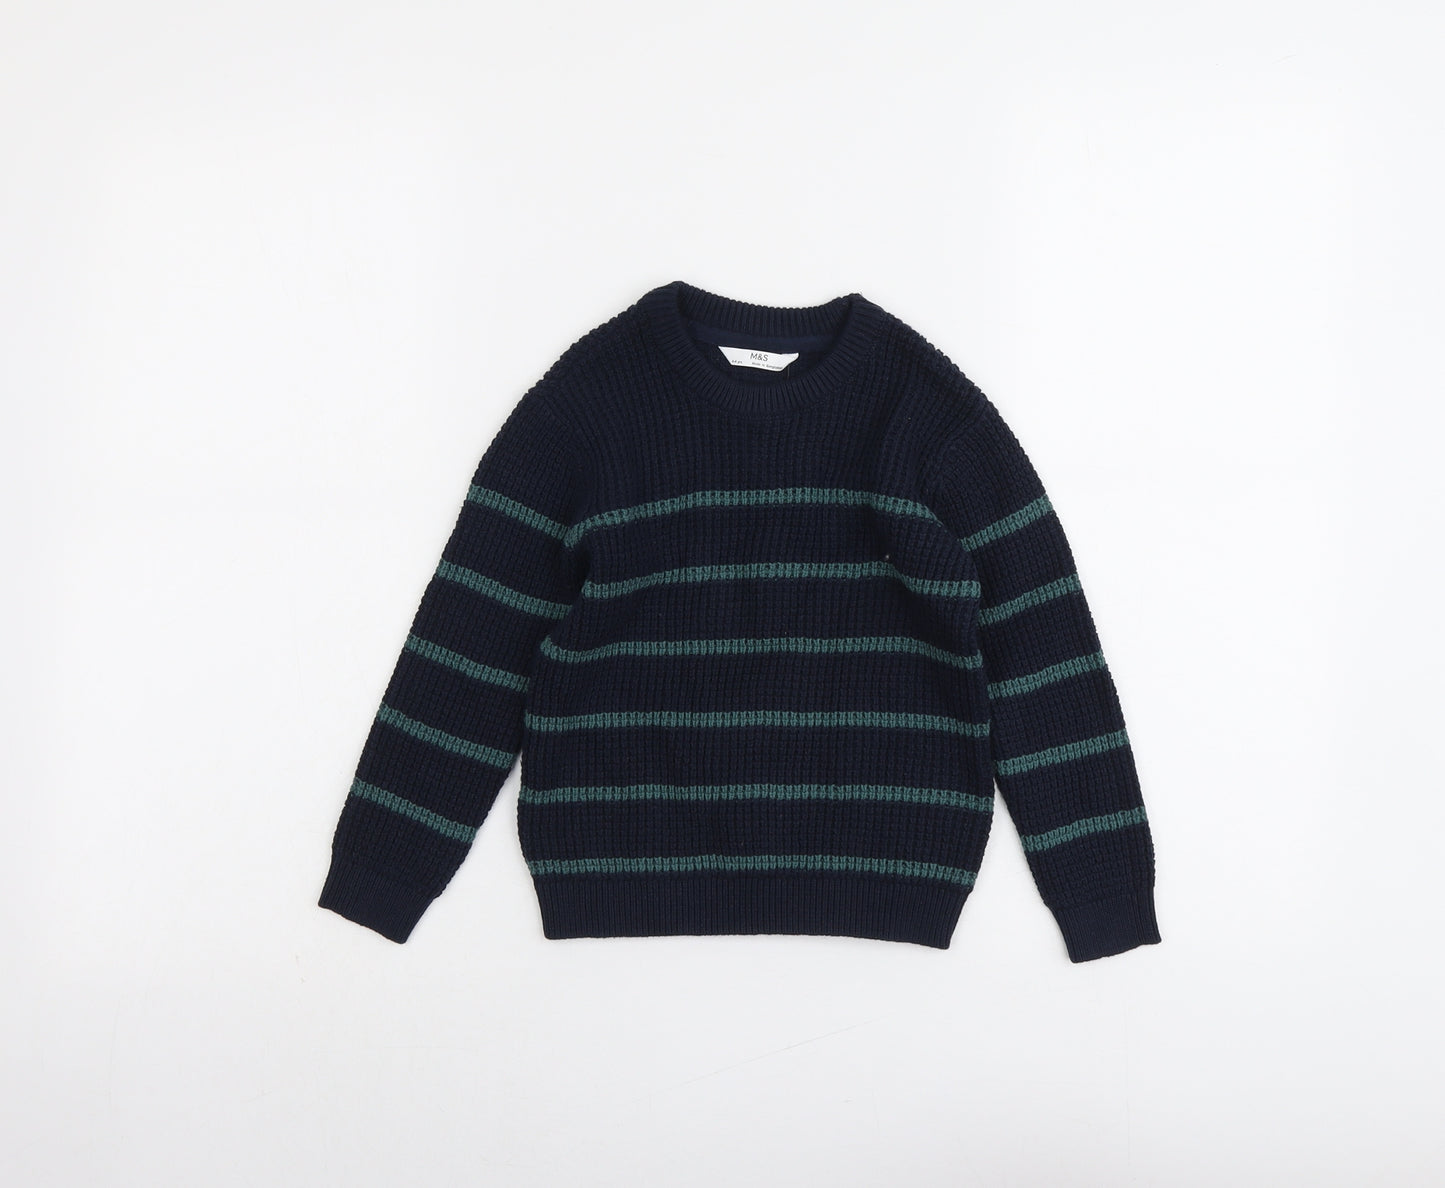 Marks and Spencer Boys Blue Crew Neck Striped Cotton Pullover Jumper Size 3-4 Years Pullover